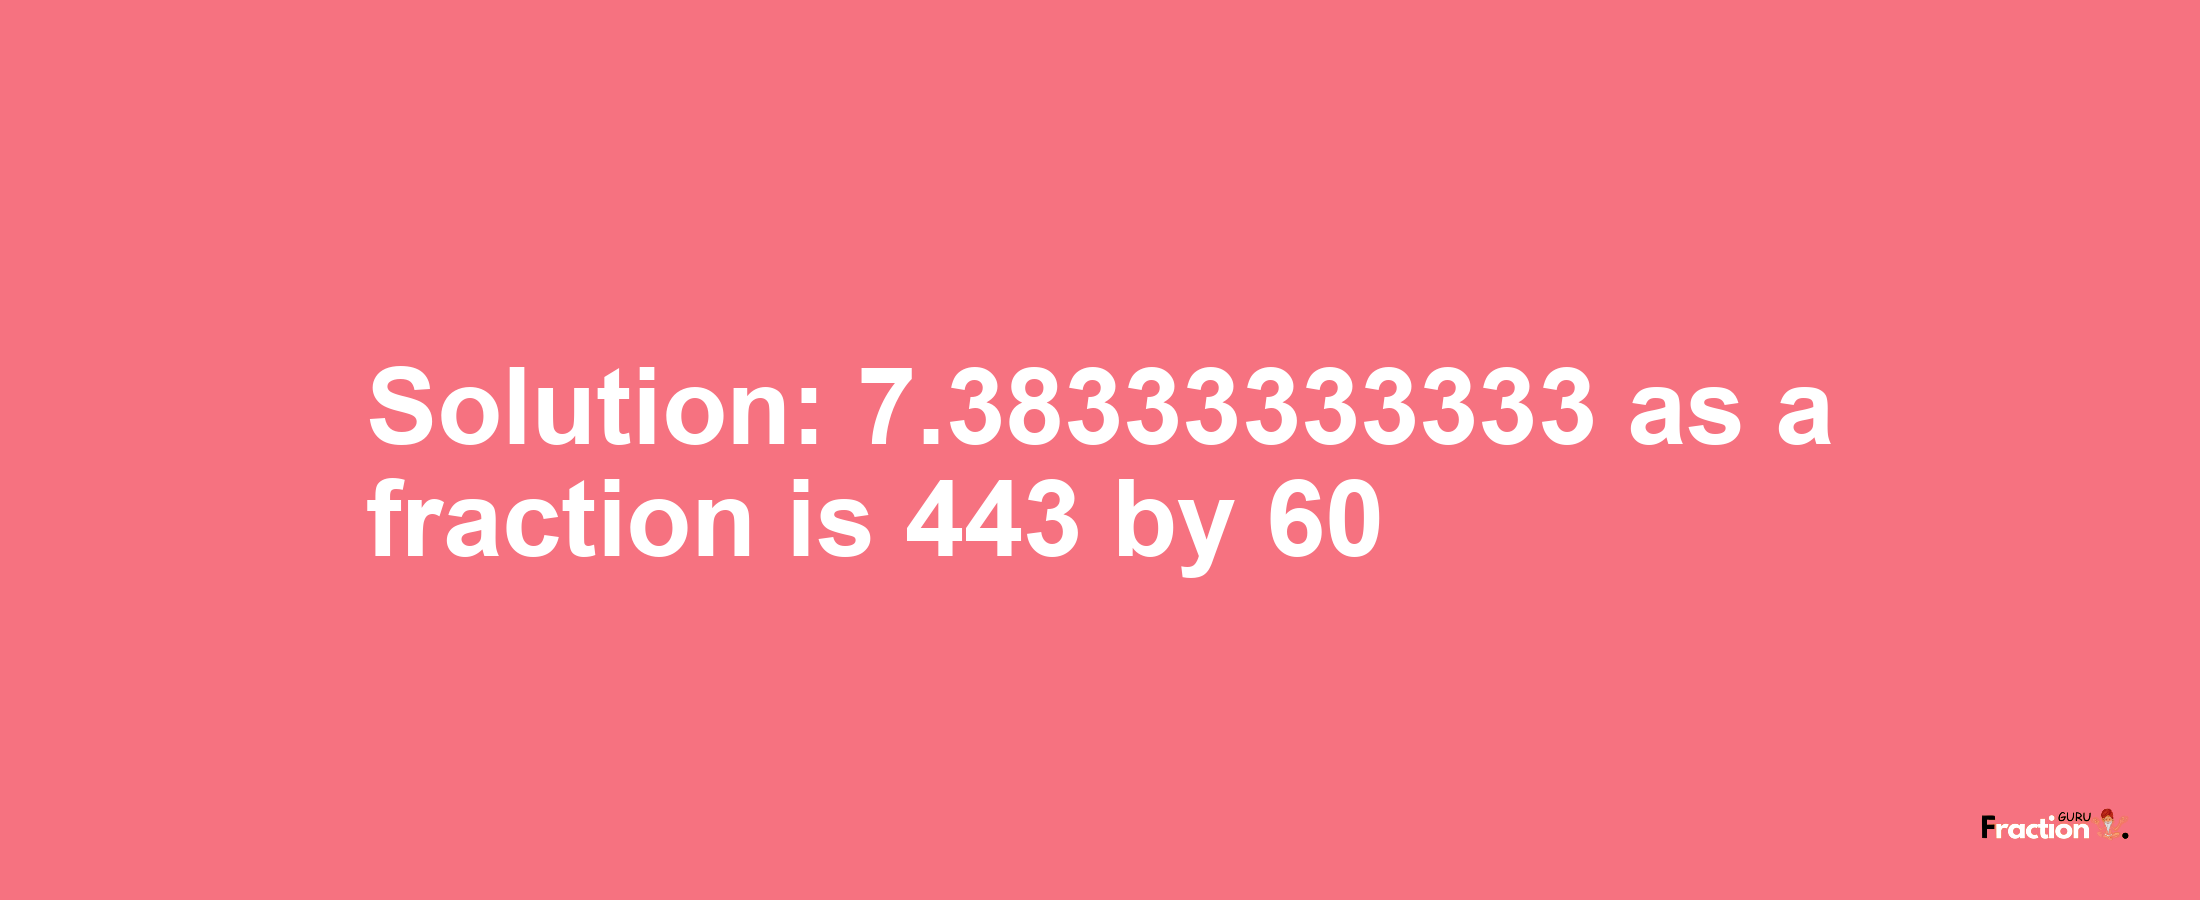 Solution:7.38333333333 as a fraction is 443/60